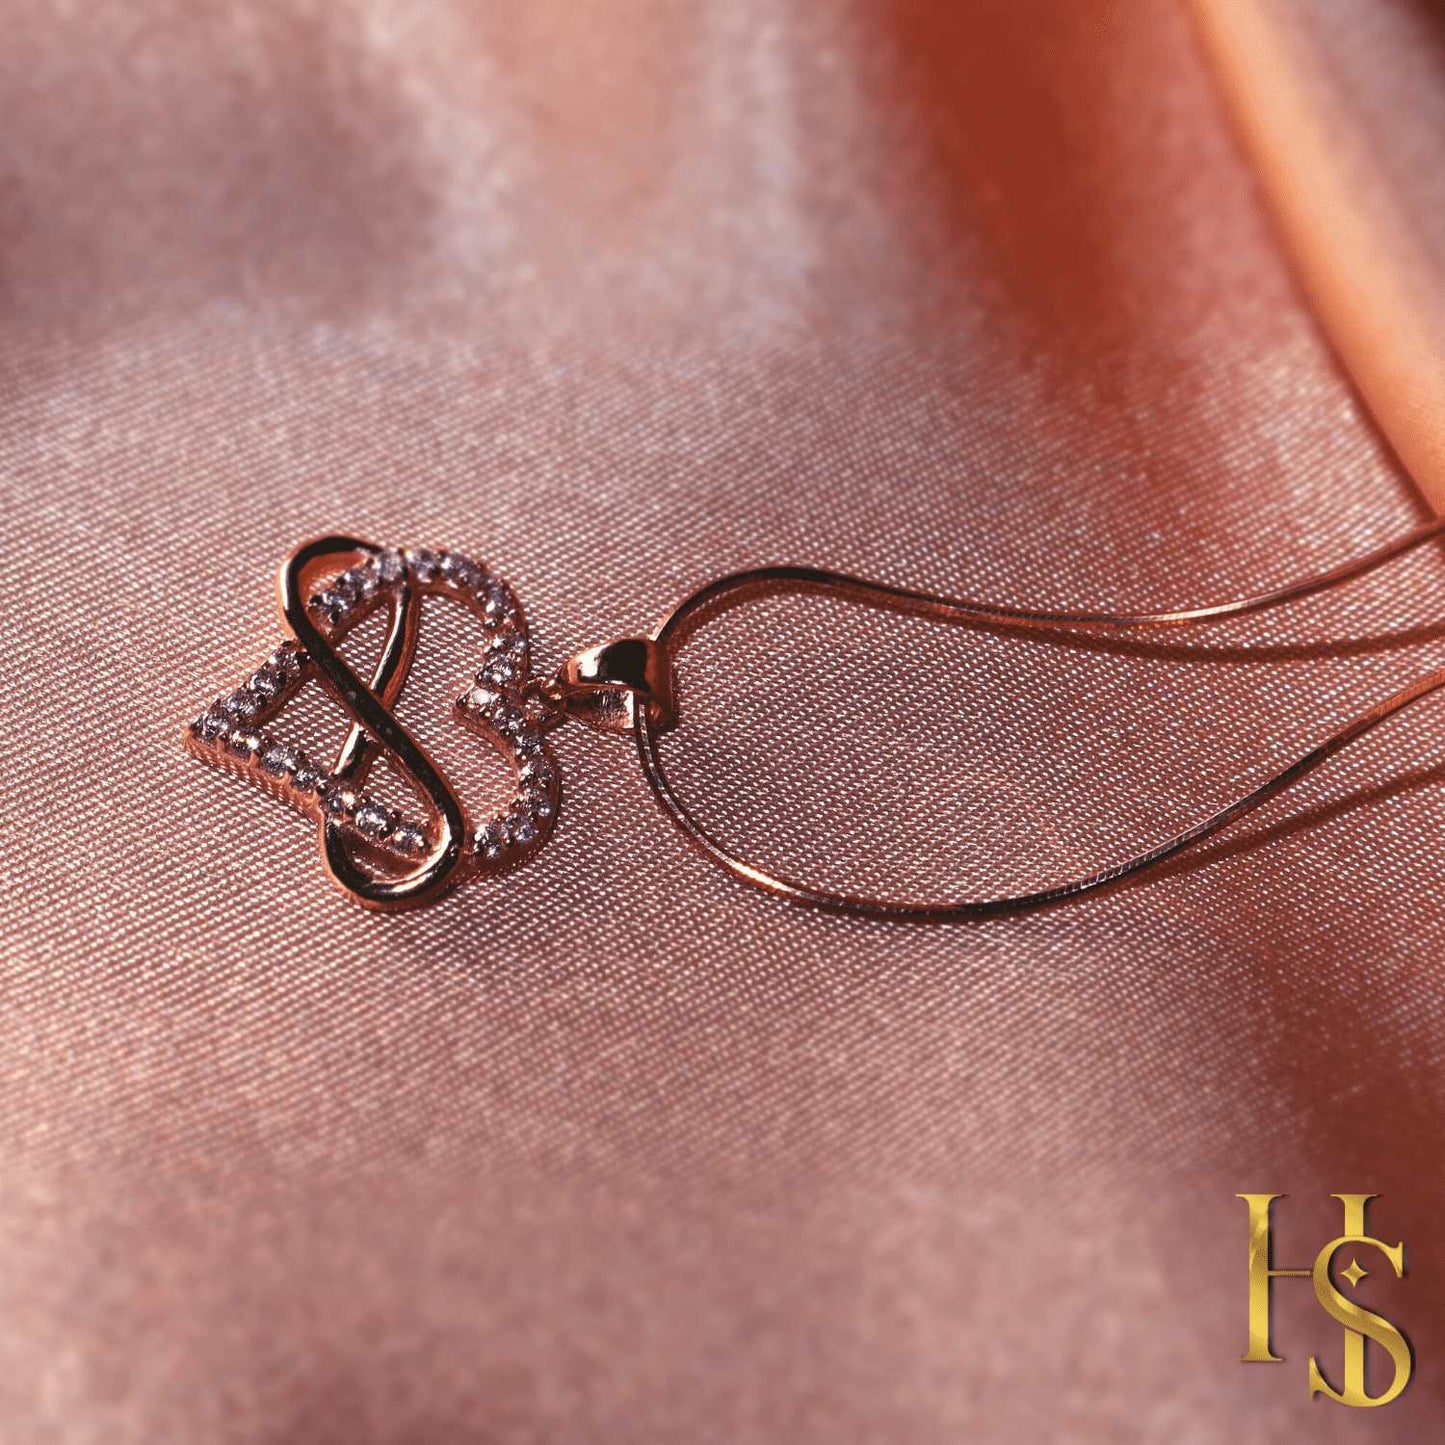 Infinity Heart Rose Gold Pendant in 92.5 Silver - Infinite Love - Studded with Swiss Zirconia - 18K Rose Gold finish